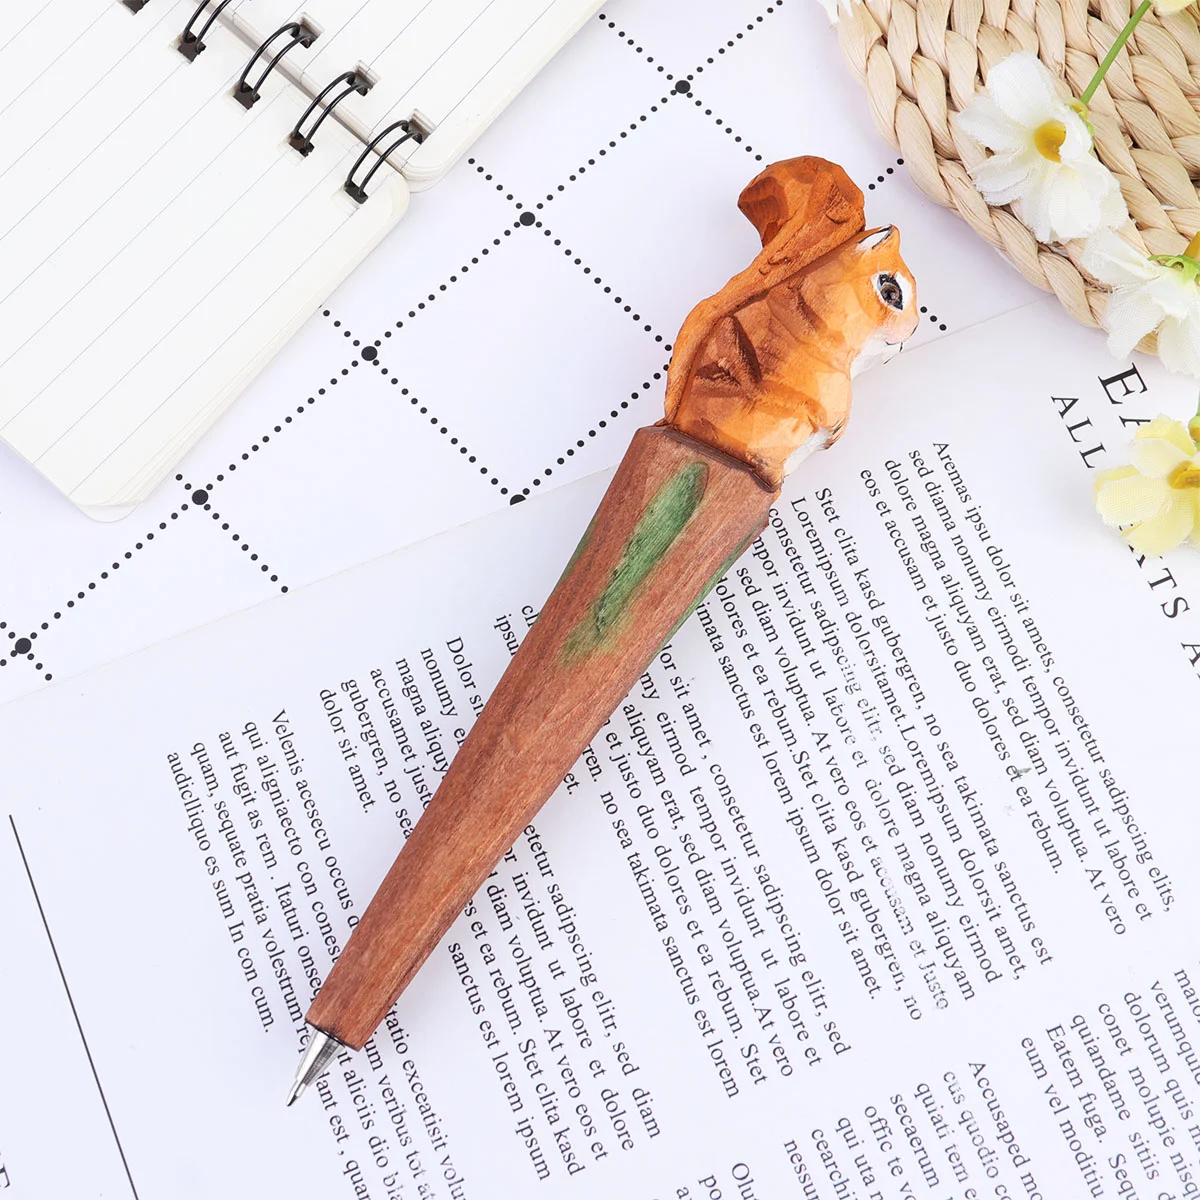 Pure Handmade Wood Carving Animal Pen Creative Wood Carving Squirrel Ballpoint Pen Replaceable Refill Gel Pen for Students for bose sennheiser creative live2 qc25 qc35 oe2 oe2i pcx450 pcx480 pcx550 y50 e55bt earphone replaceable nylon braided cable